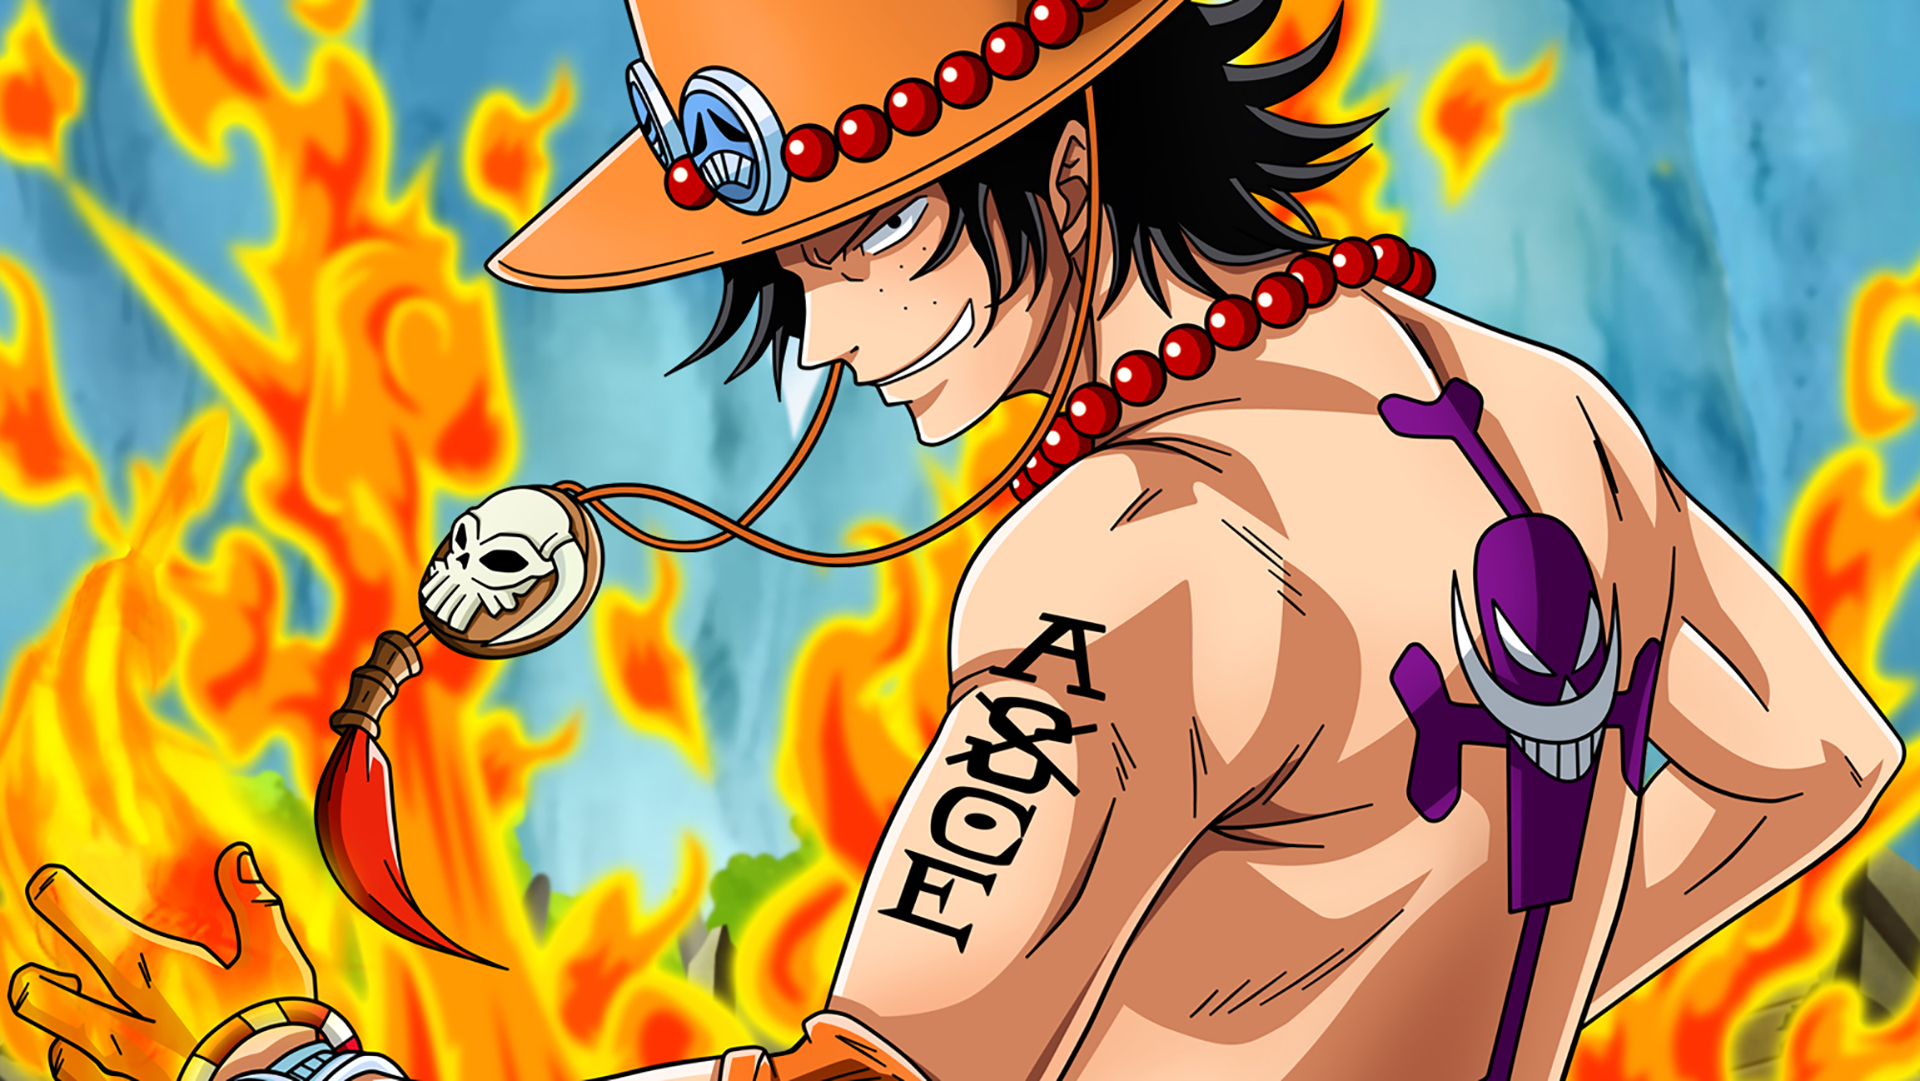 Portgas Ace Cool One Piece Wallpapers.